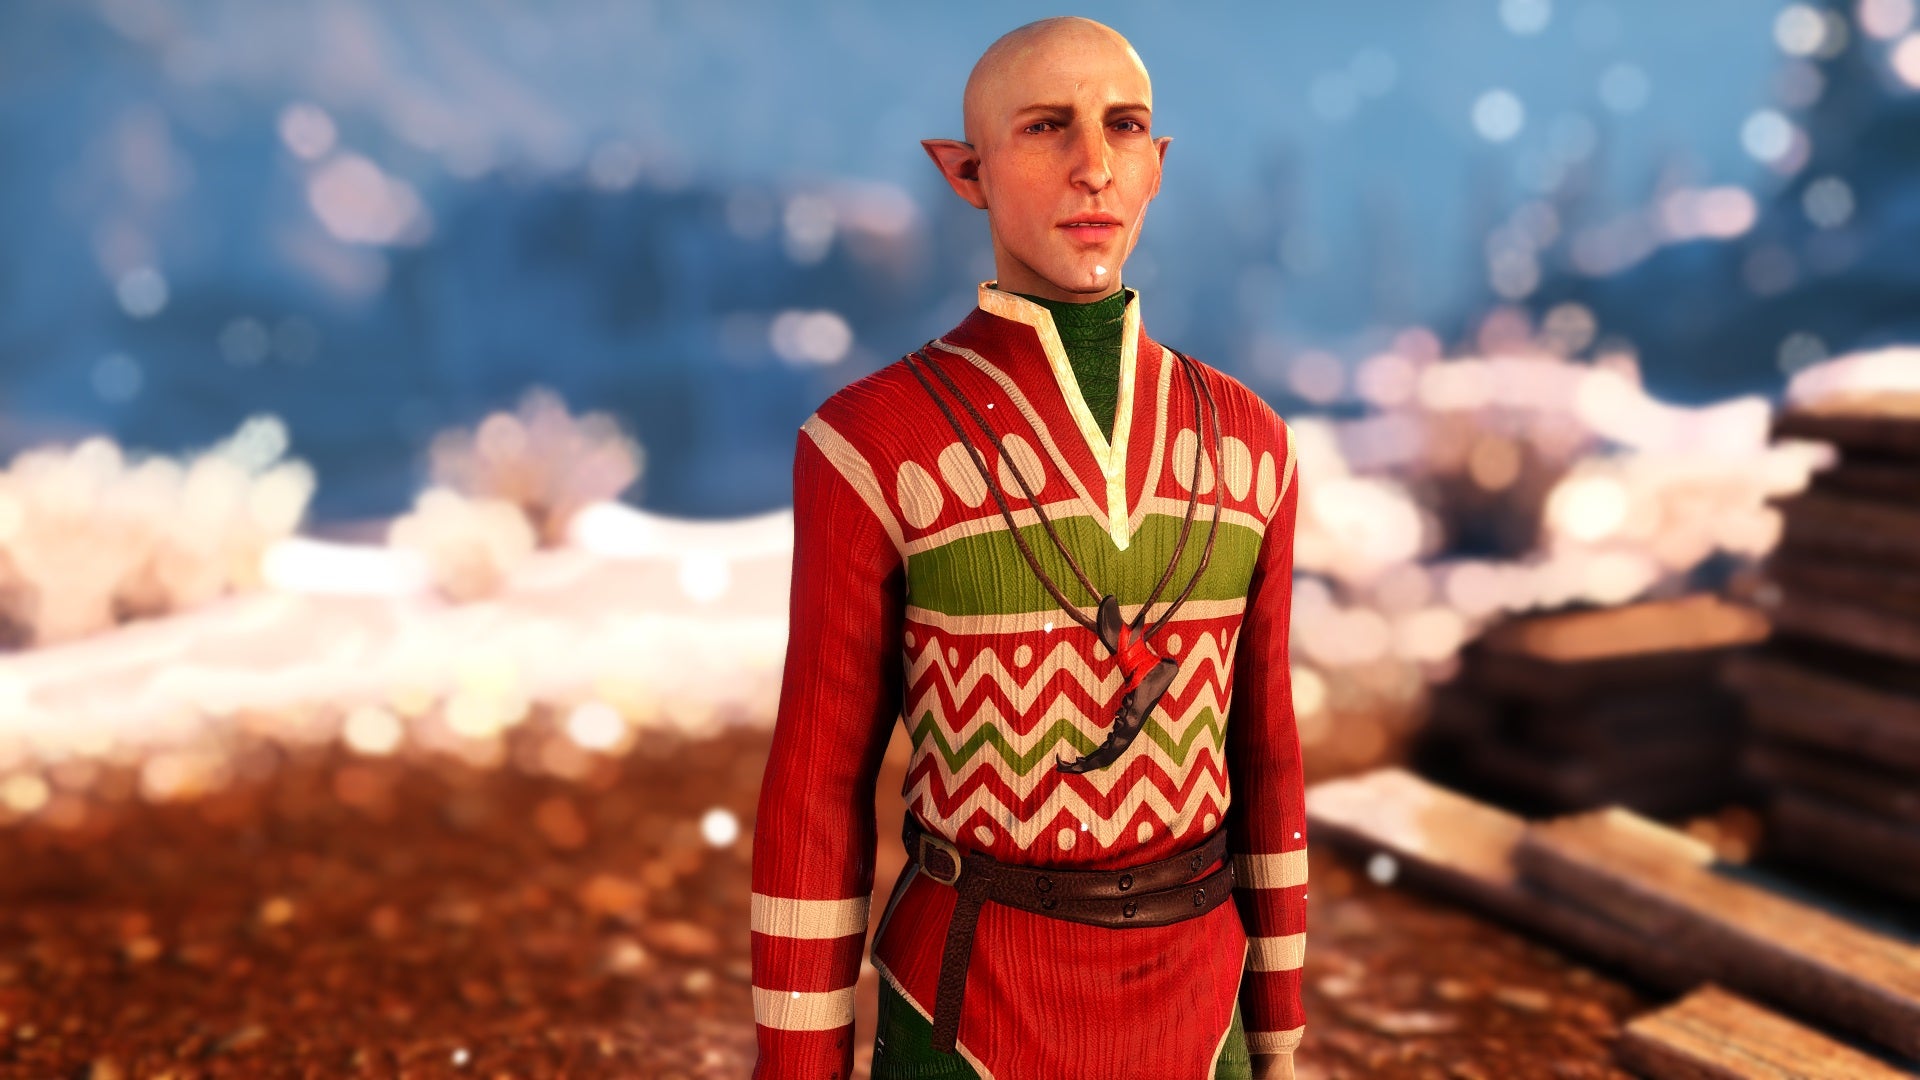 Dragon Age: Inquisition's Solas wearing an ugly green, red and white Christmas jumper.